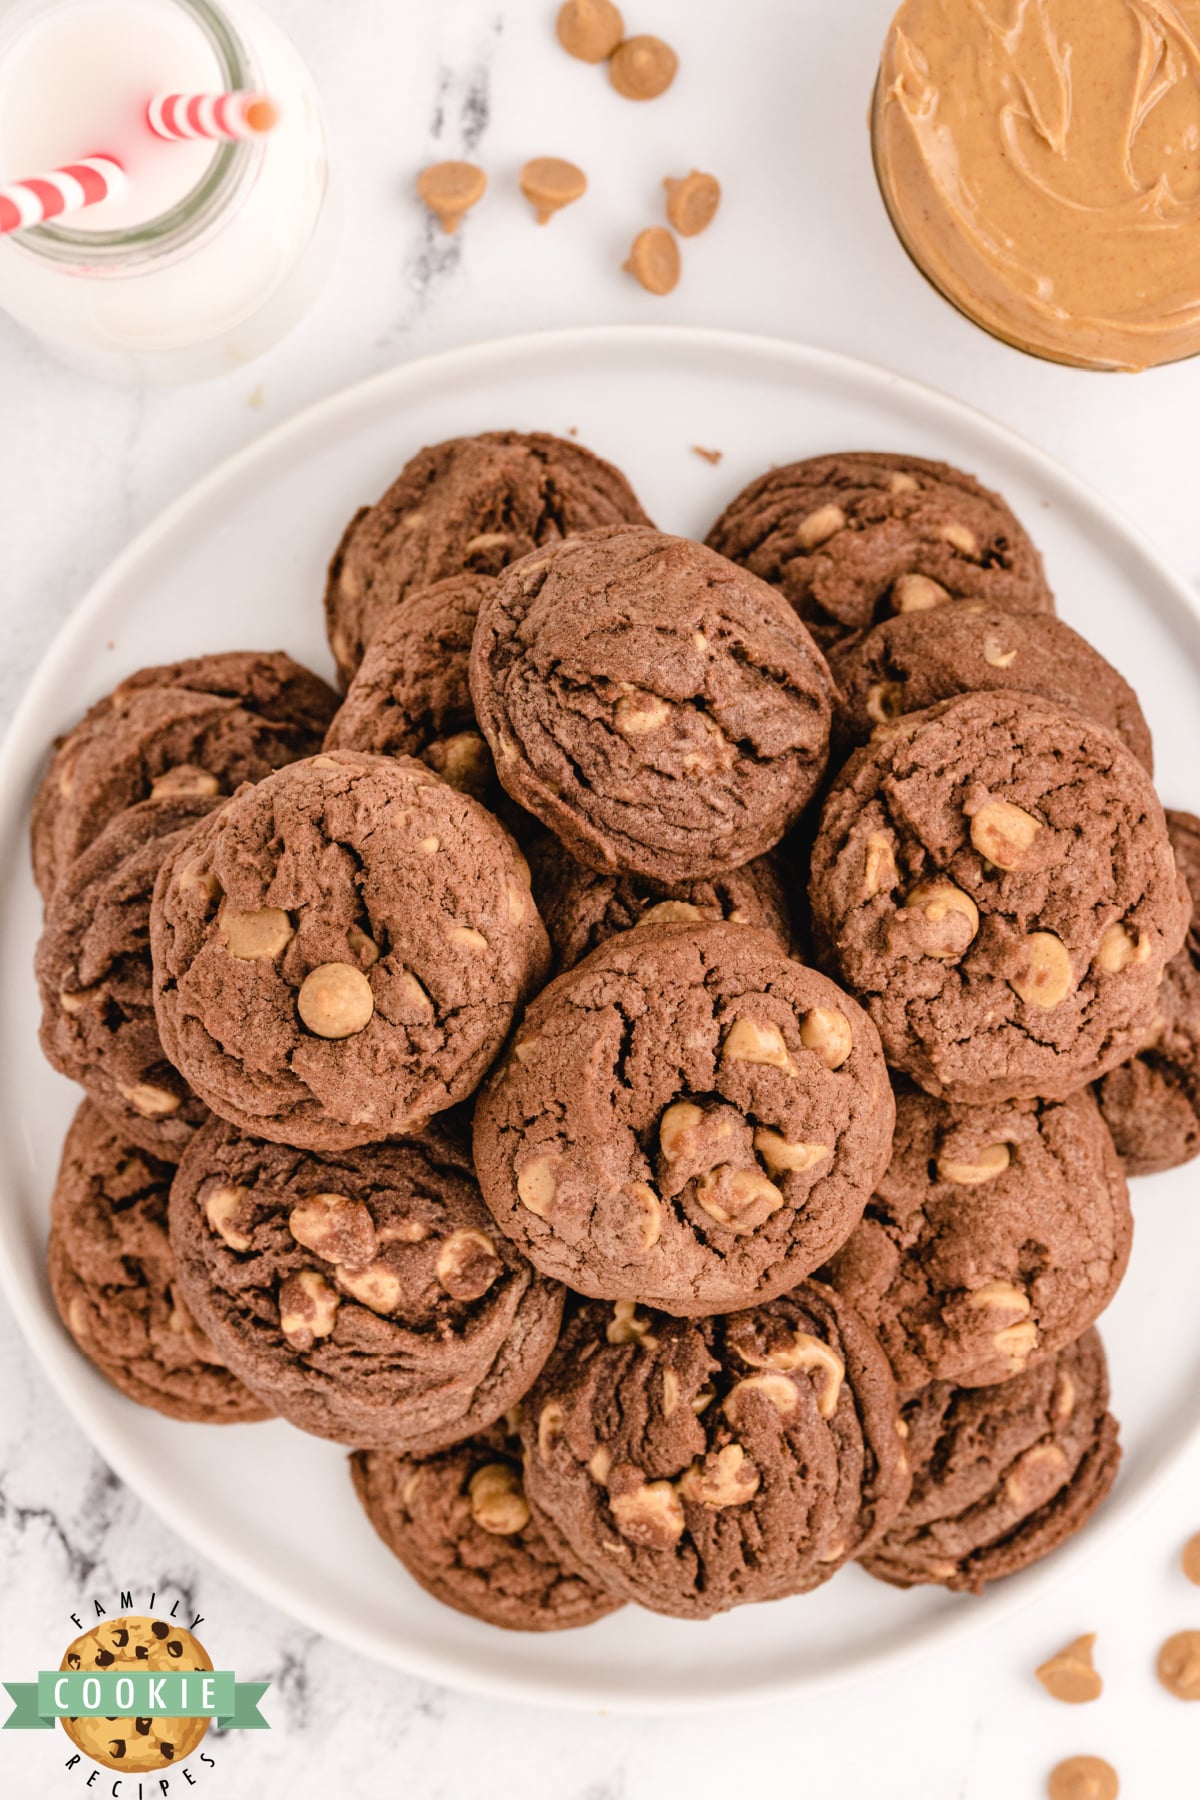 Reese's peanut butter chip chocolate cookies